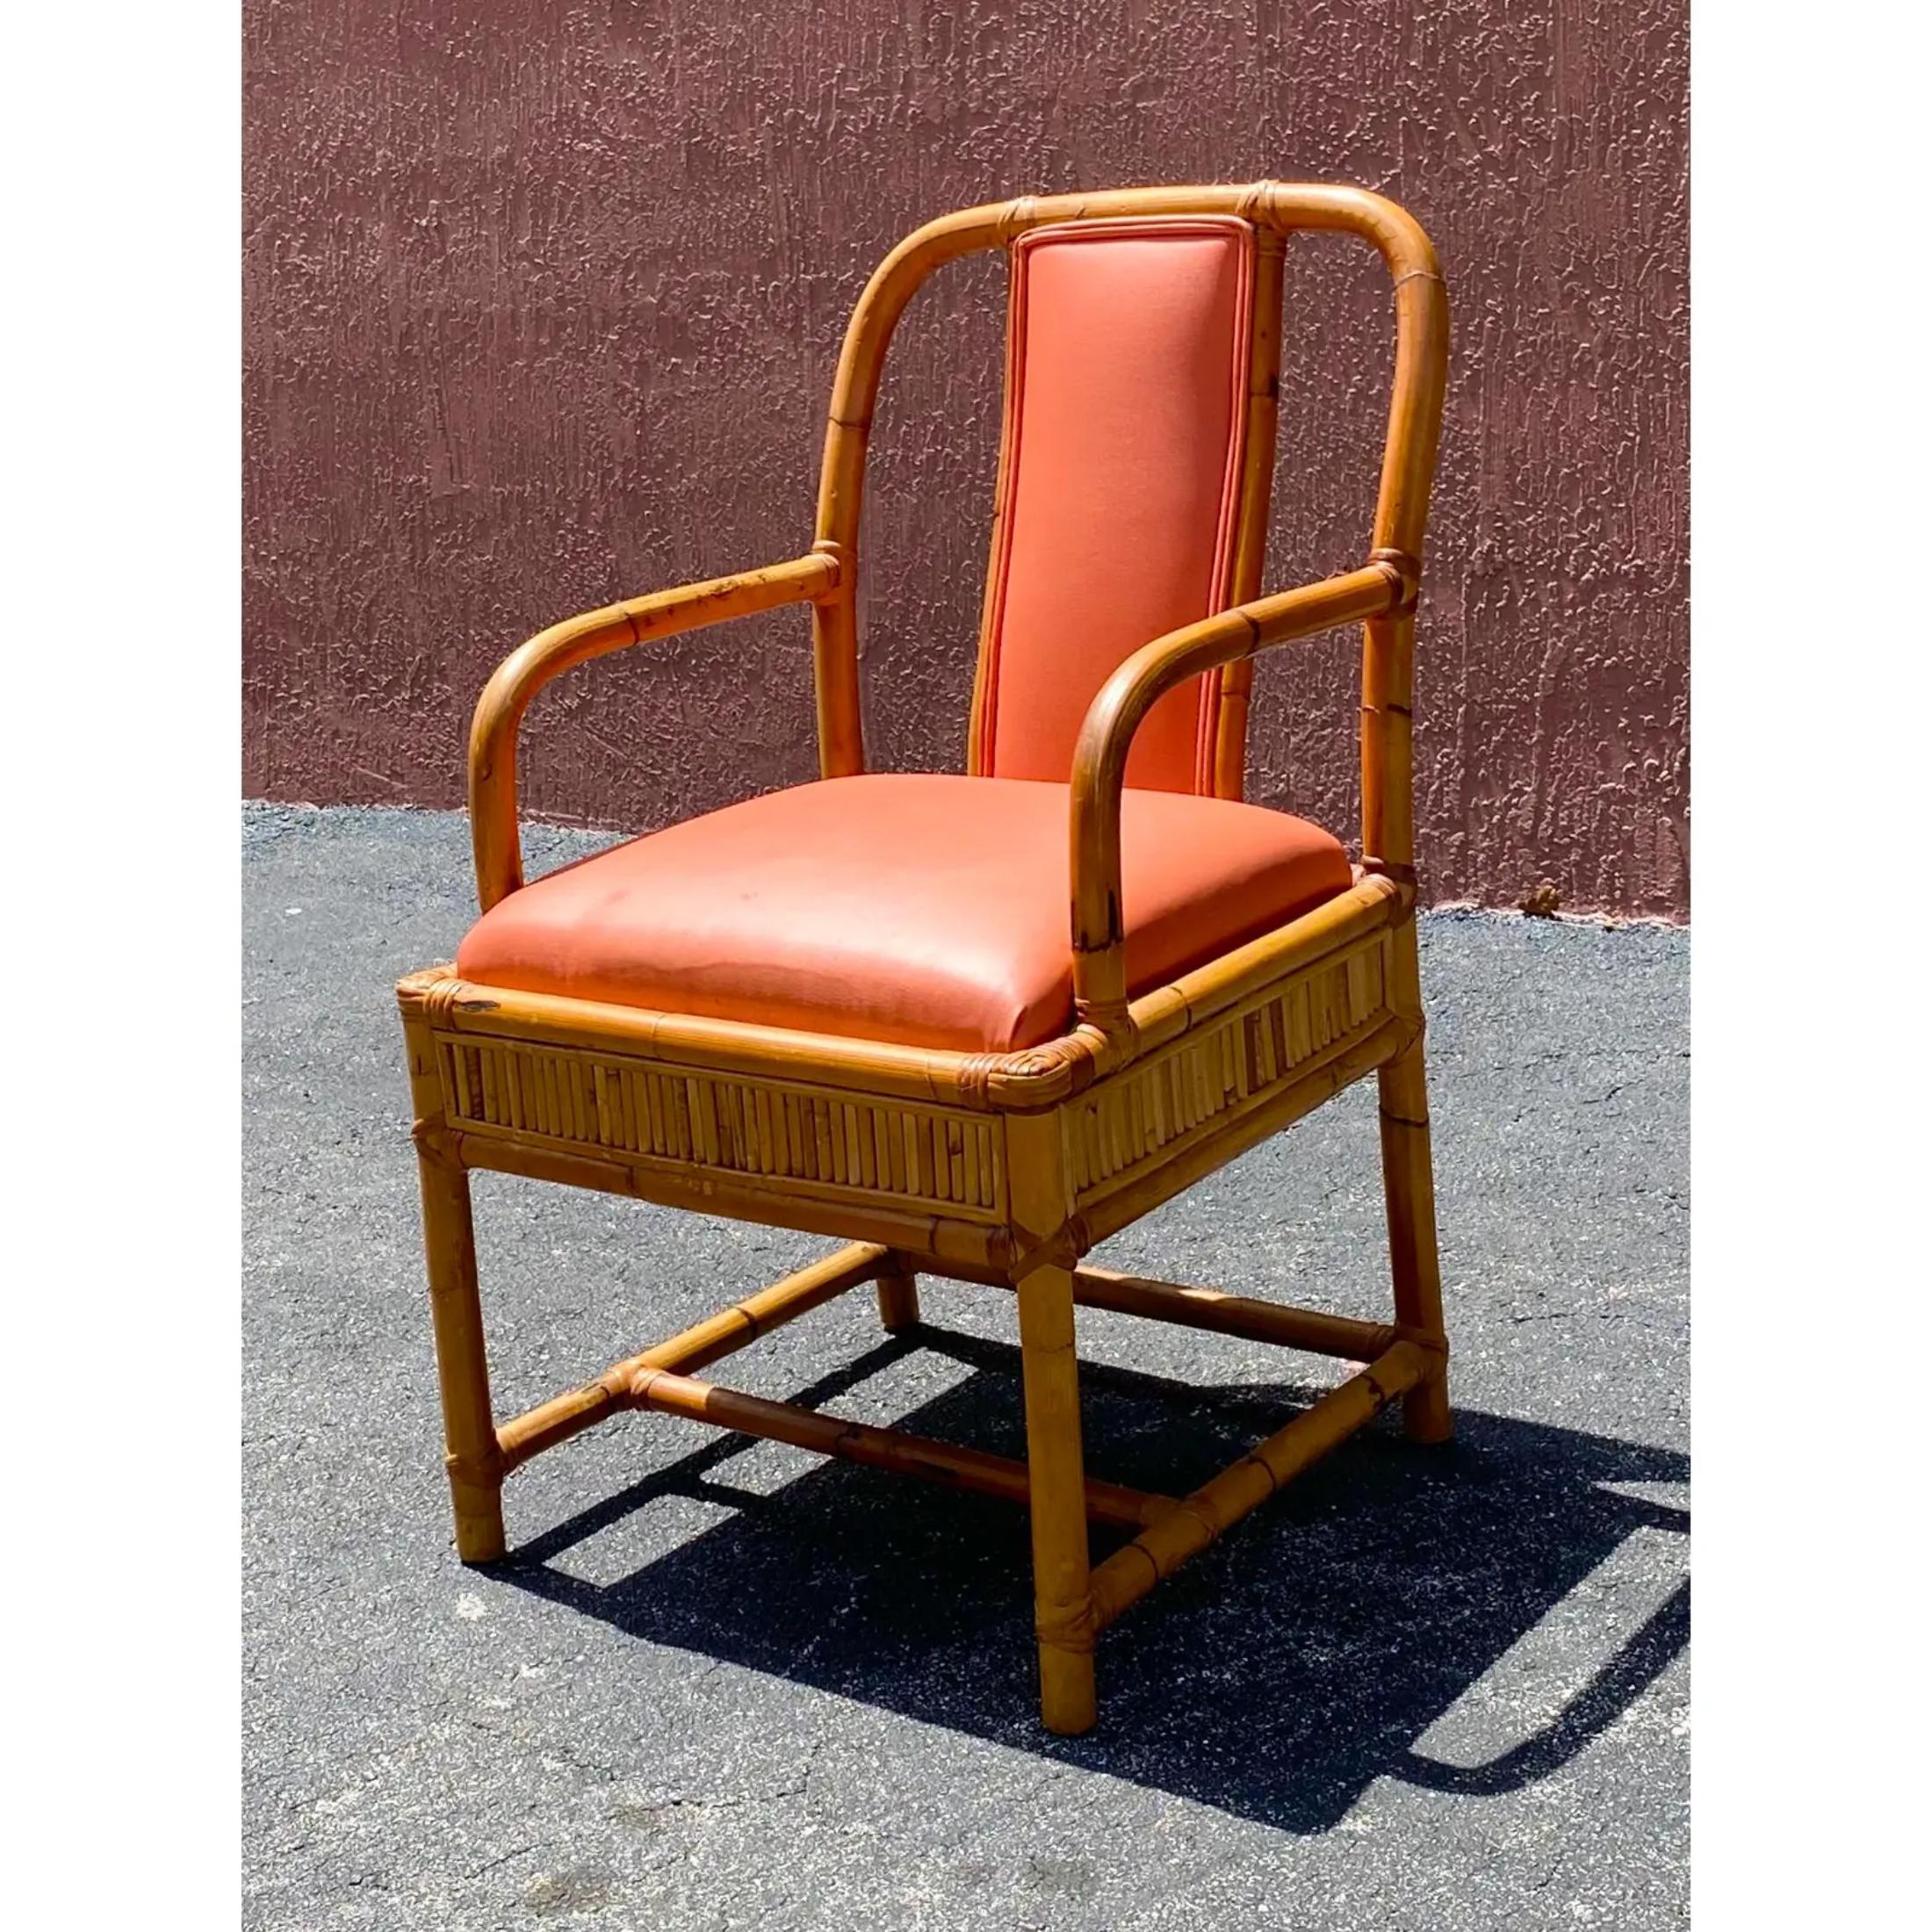 Fantastic vintage Henry Olko bamboo arm chair. The seat is done in a beautiful coral leather. The chair has beautiful bamboo pattern work all along the perimeter.